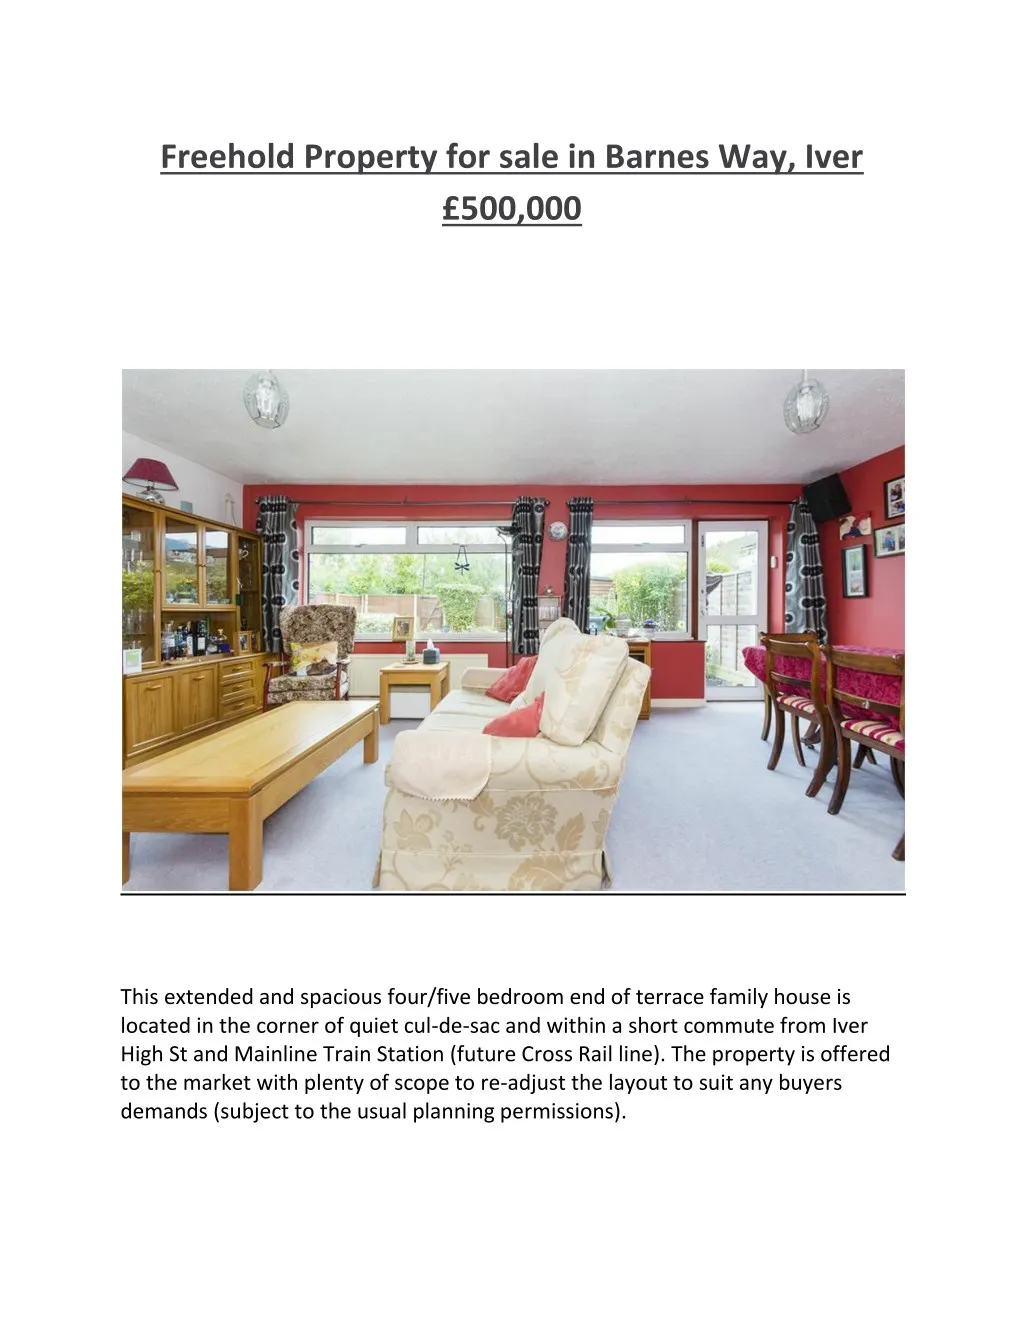 freehold property for sale in barnes way iver